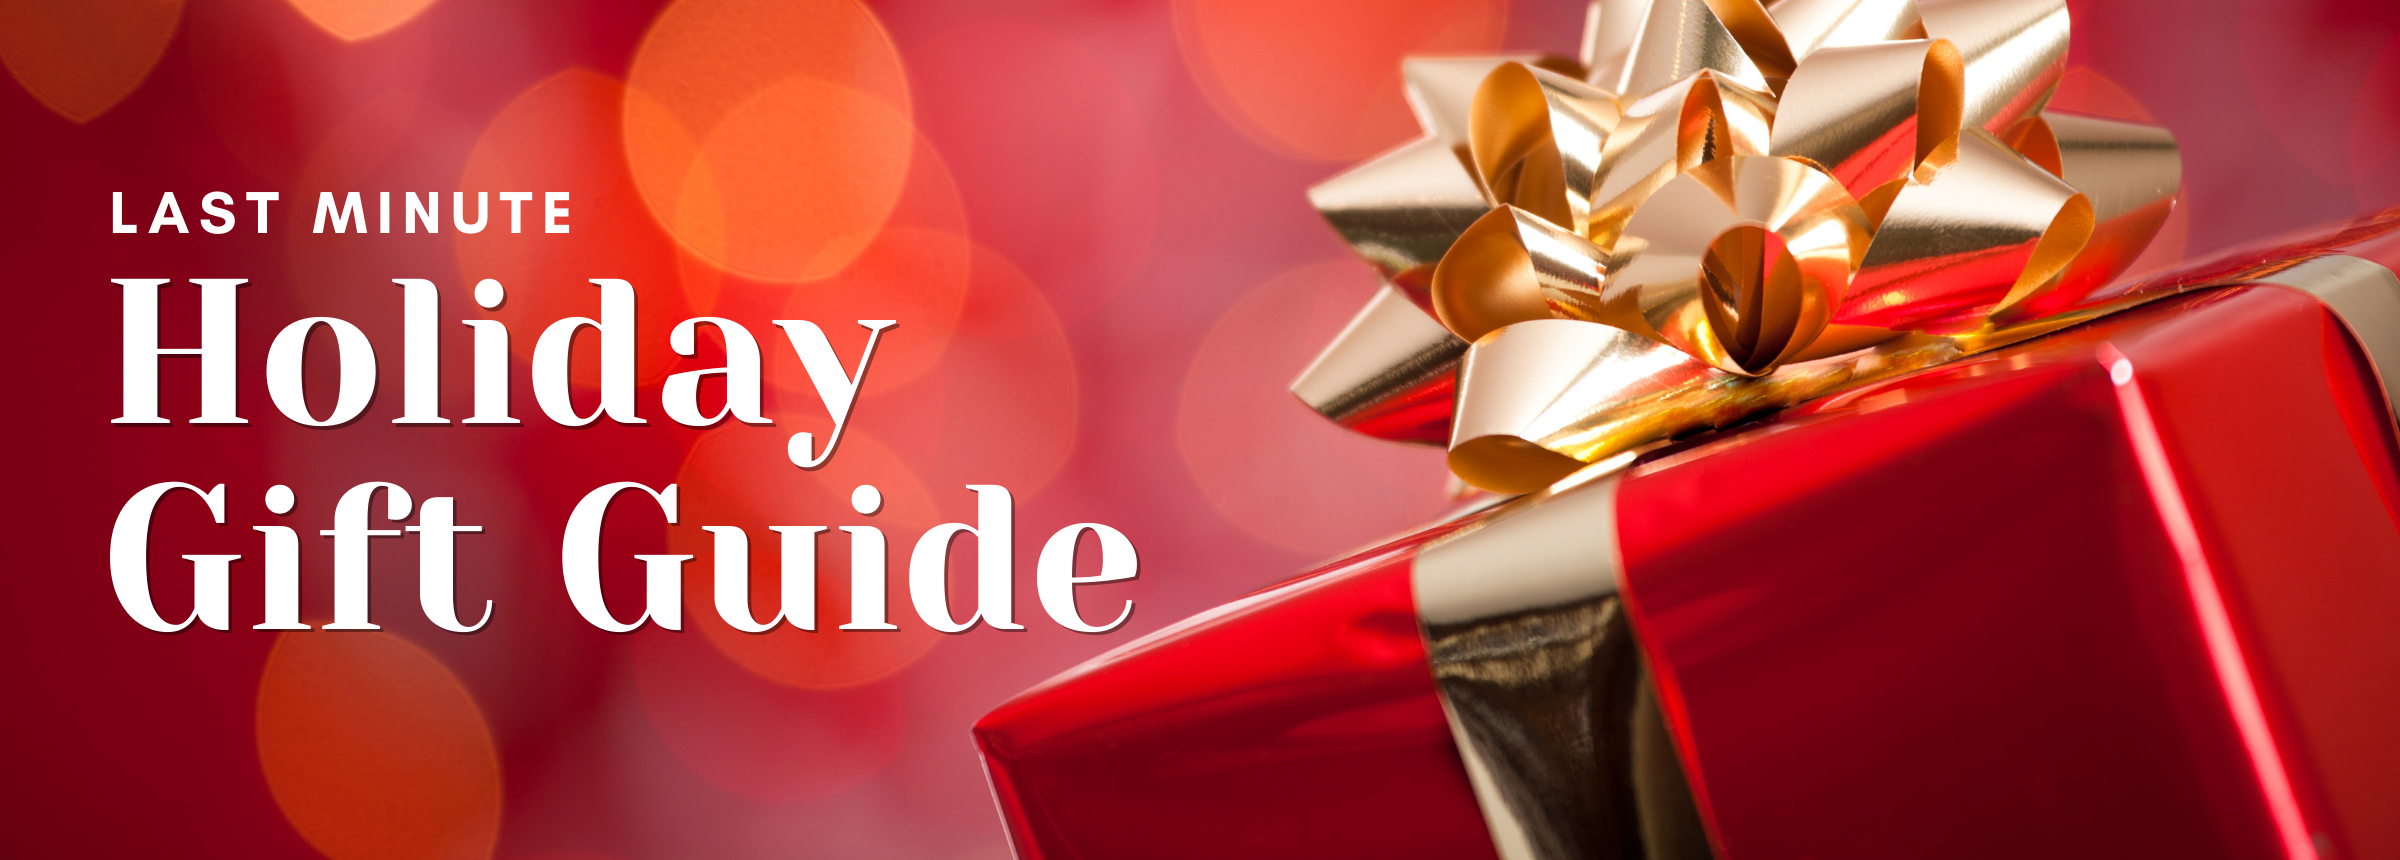 Last Minute Holiday Gift Guide Blog Post Header